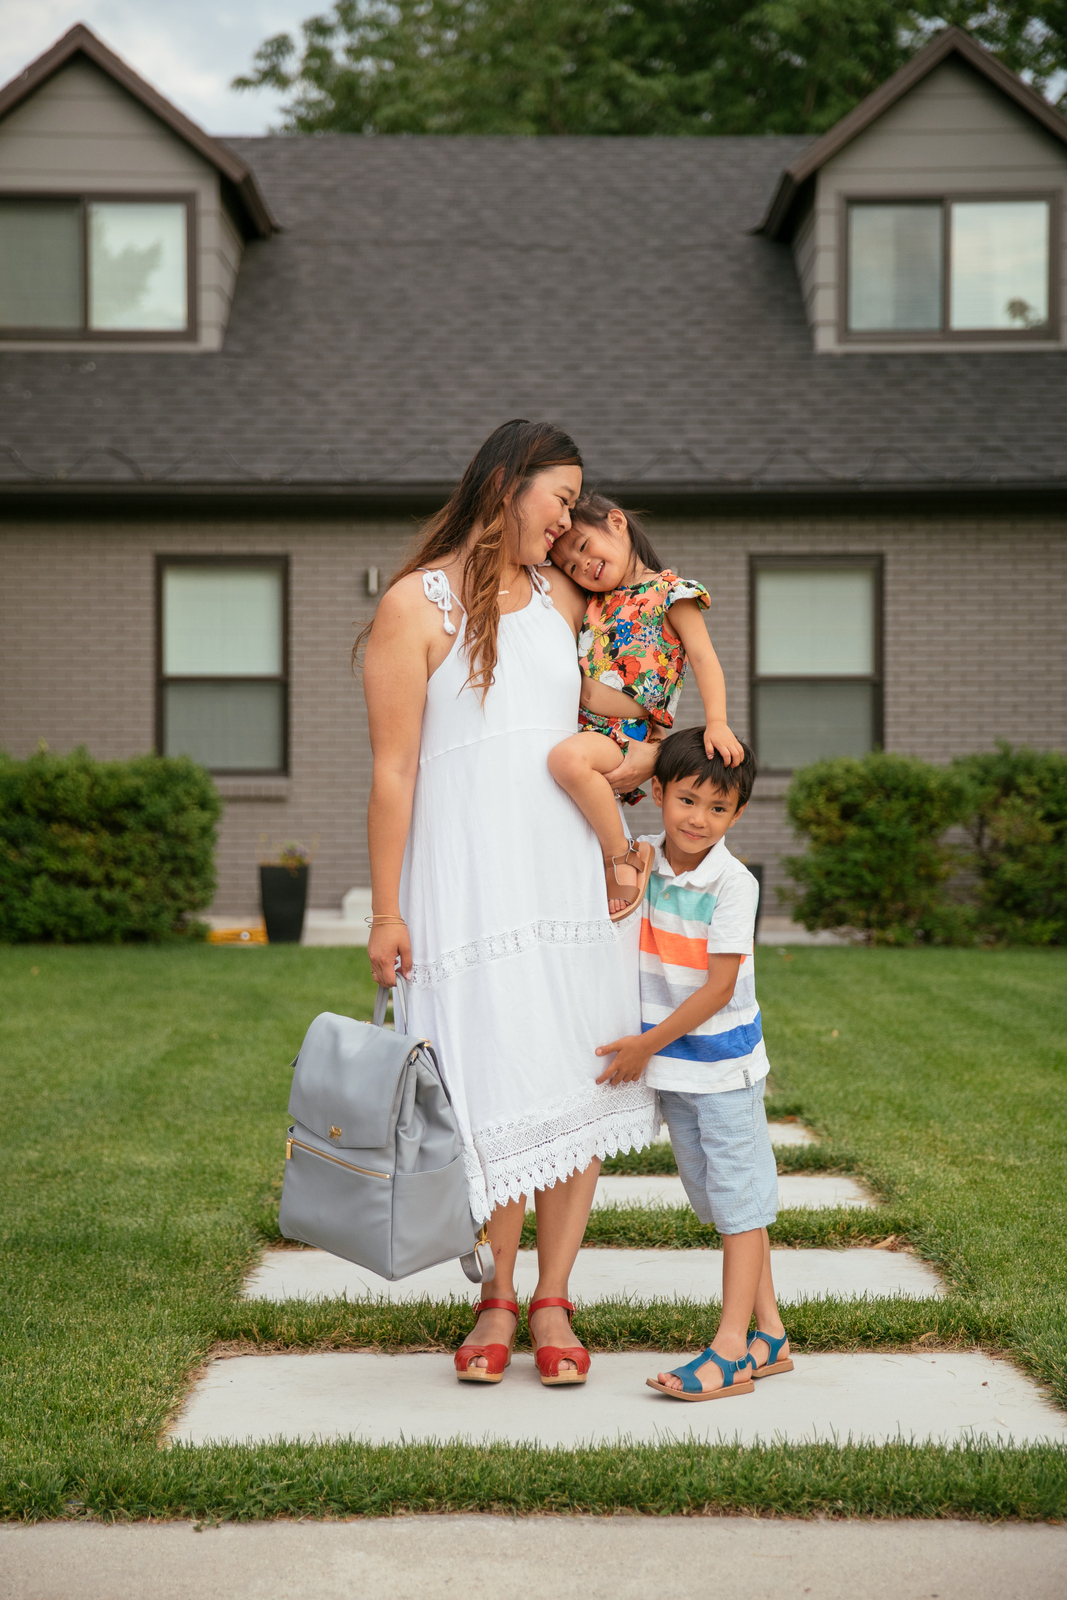 Fantastic Family Photos Ideas Ft. The Cutest Diaper Bag From Freshly Picked by Utah blogger Sandy A La Mode